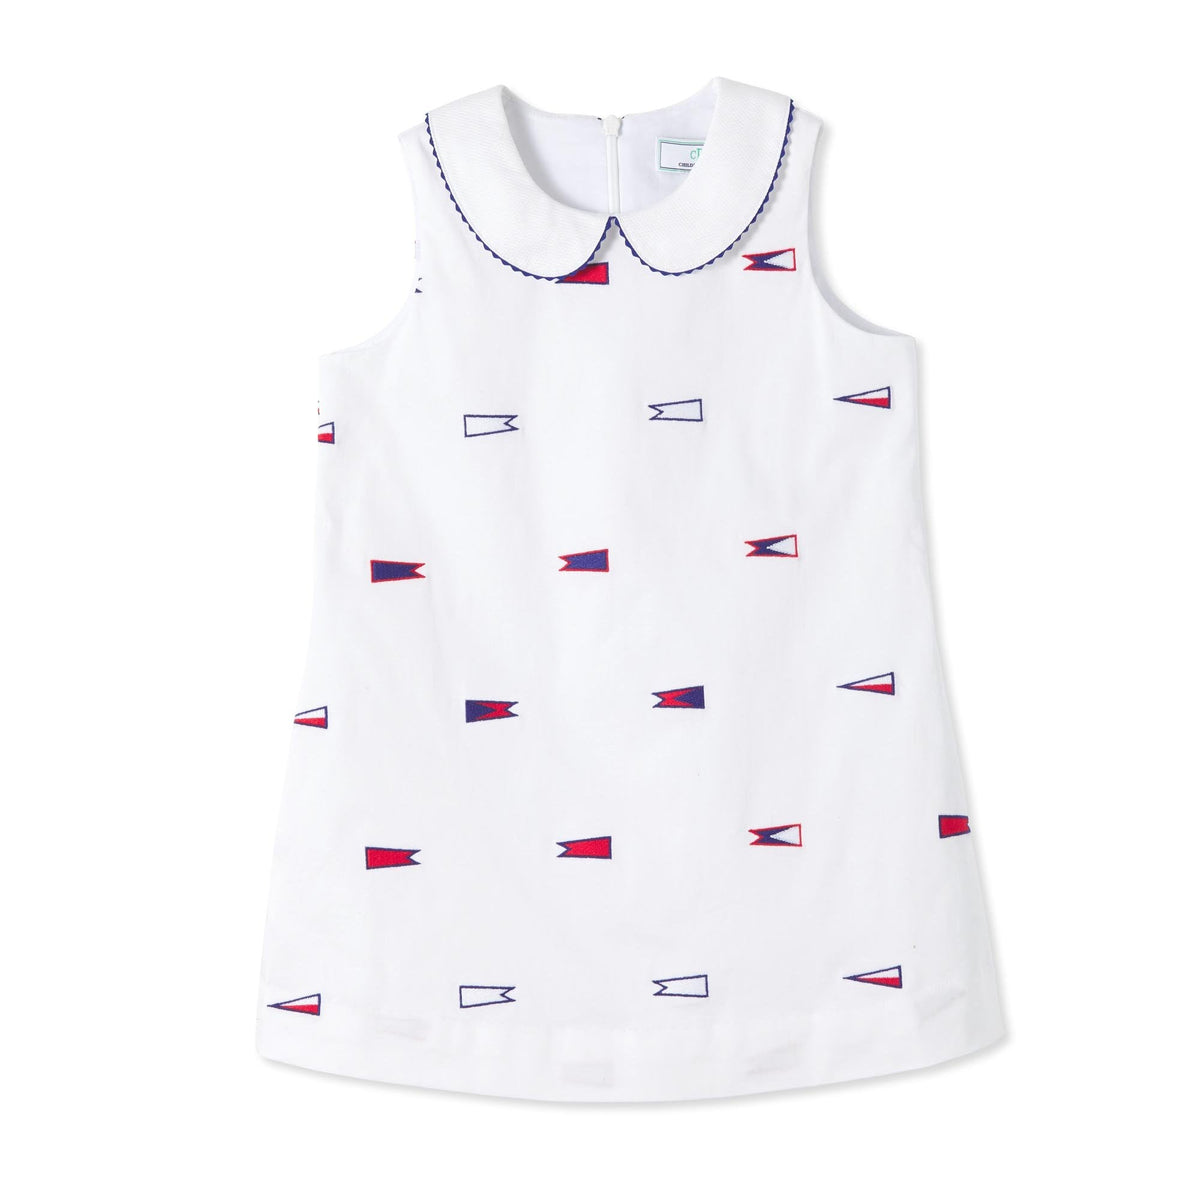 Classic and Preppy Maddie Dress, Bright White Burgee Embroidery-Dresses, Jumpsuits and Rompers-Burgees on Bright White-6-9M-CPC - Classic Prep Childrenswear